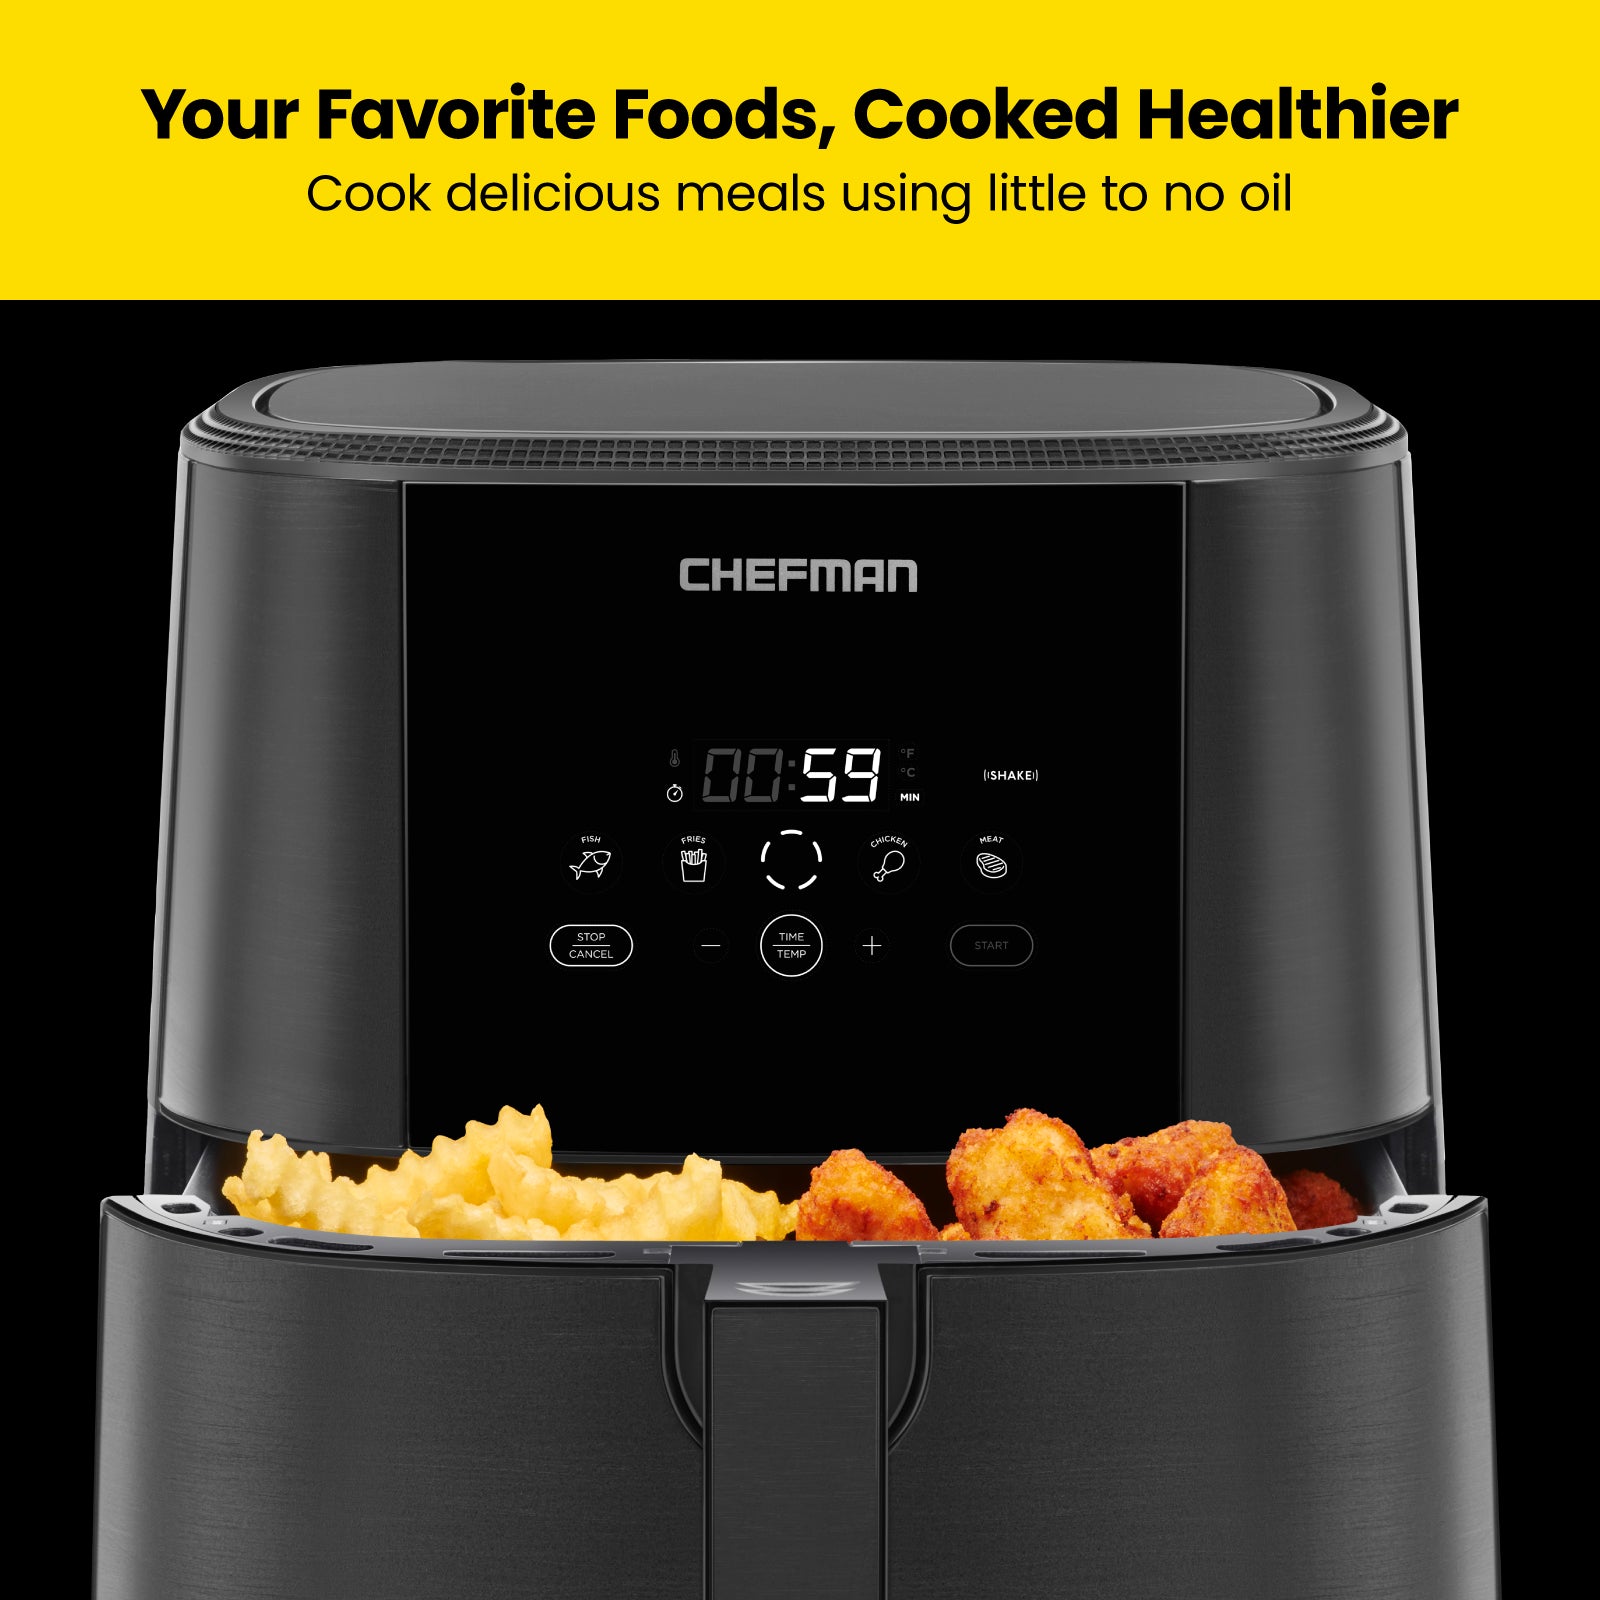 How To Use Chefman Air Fryer